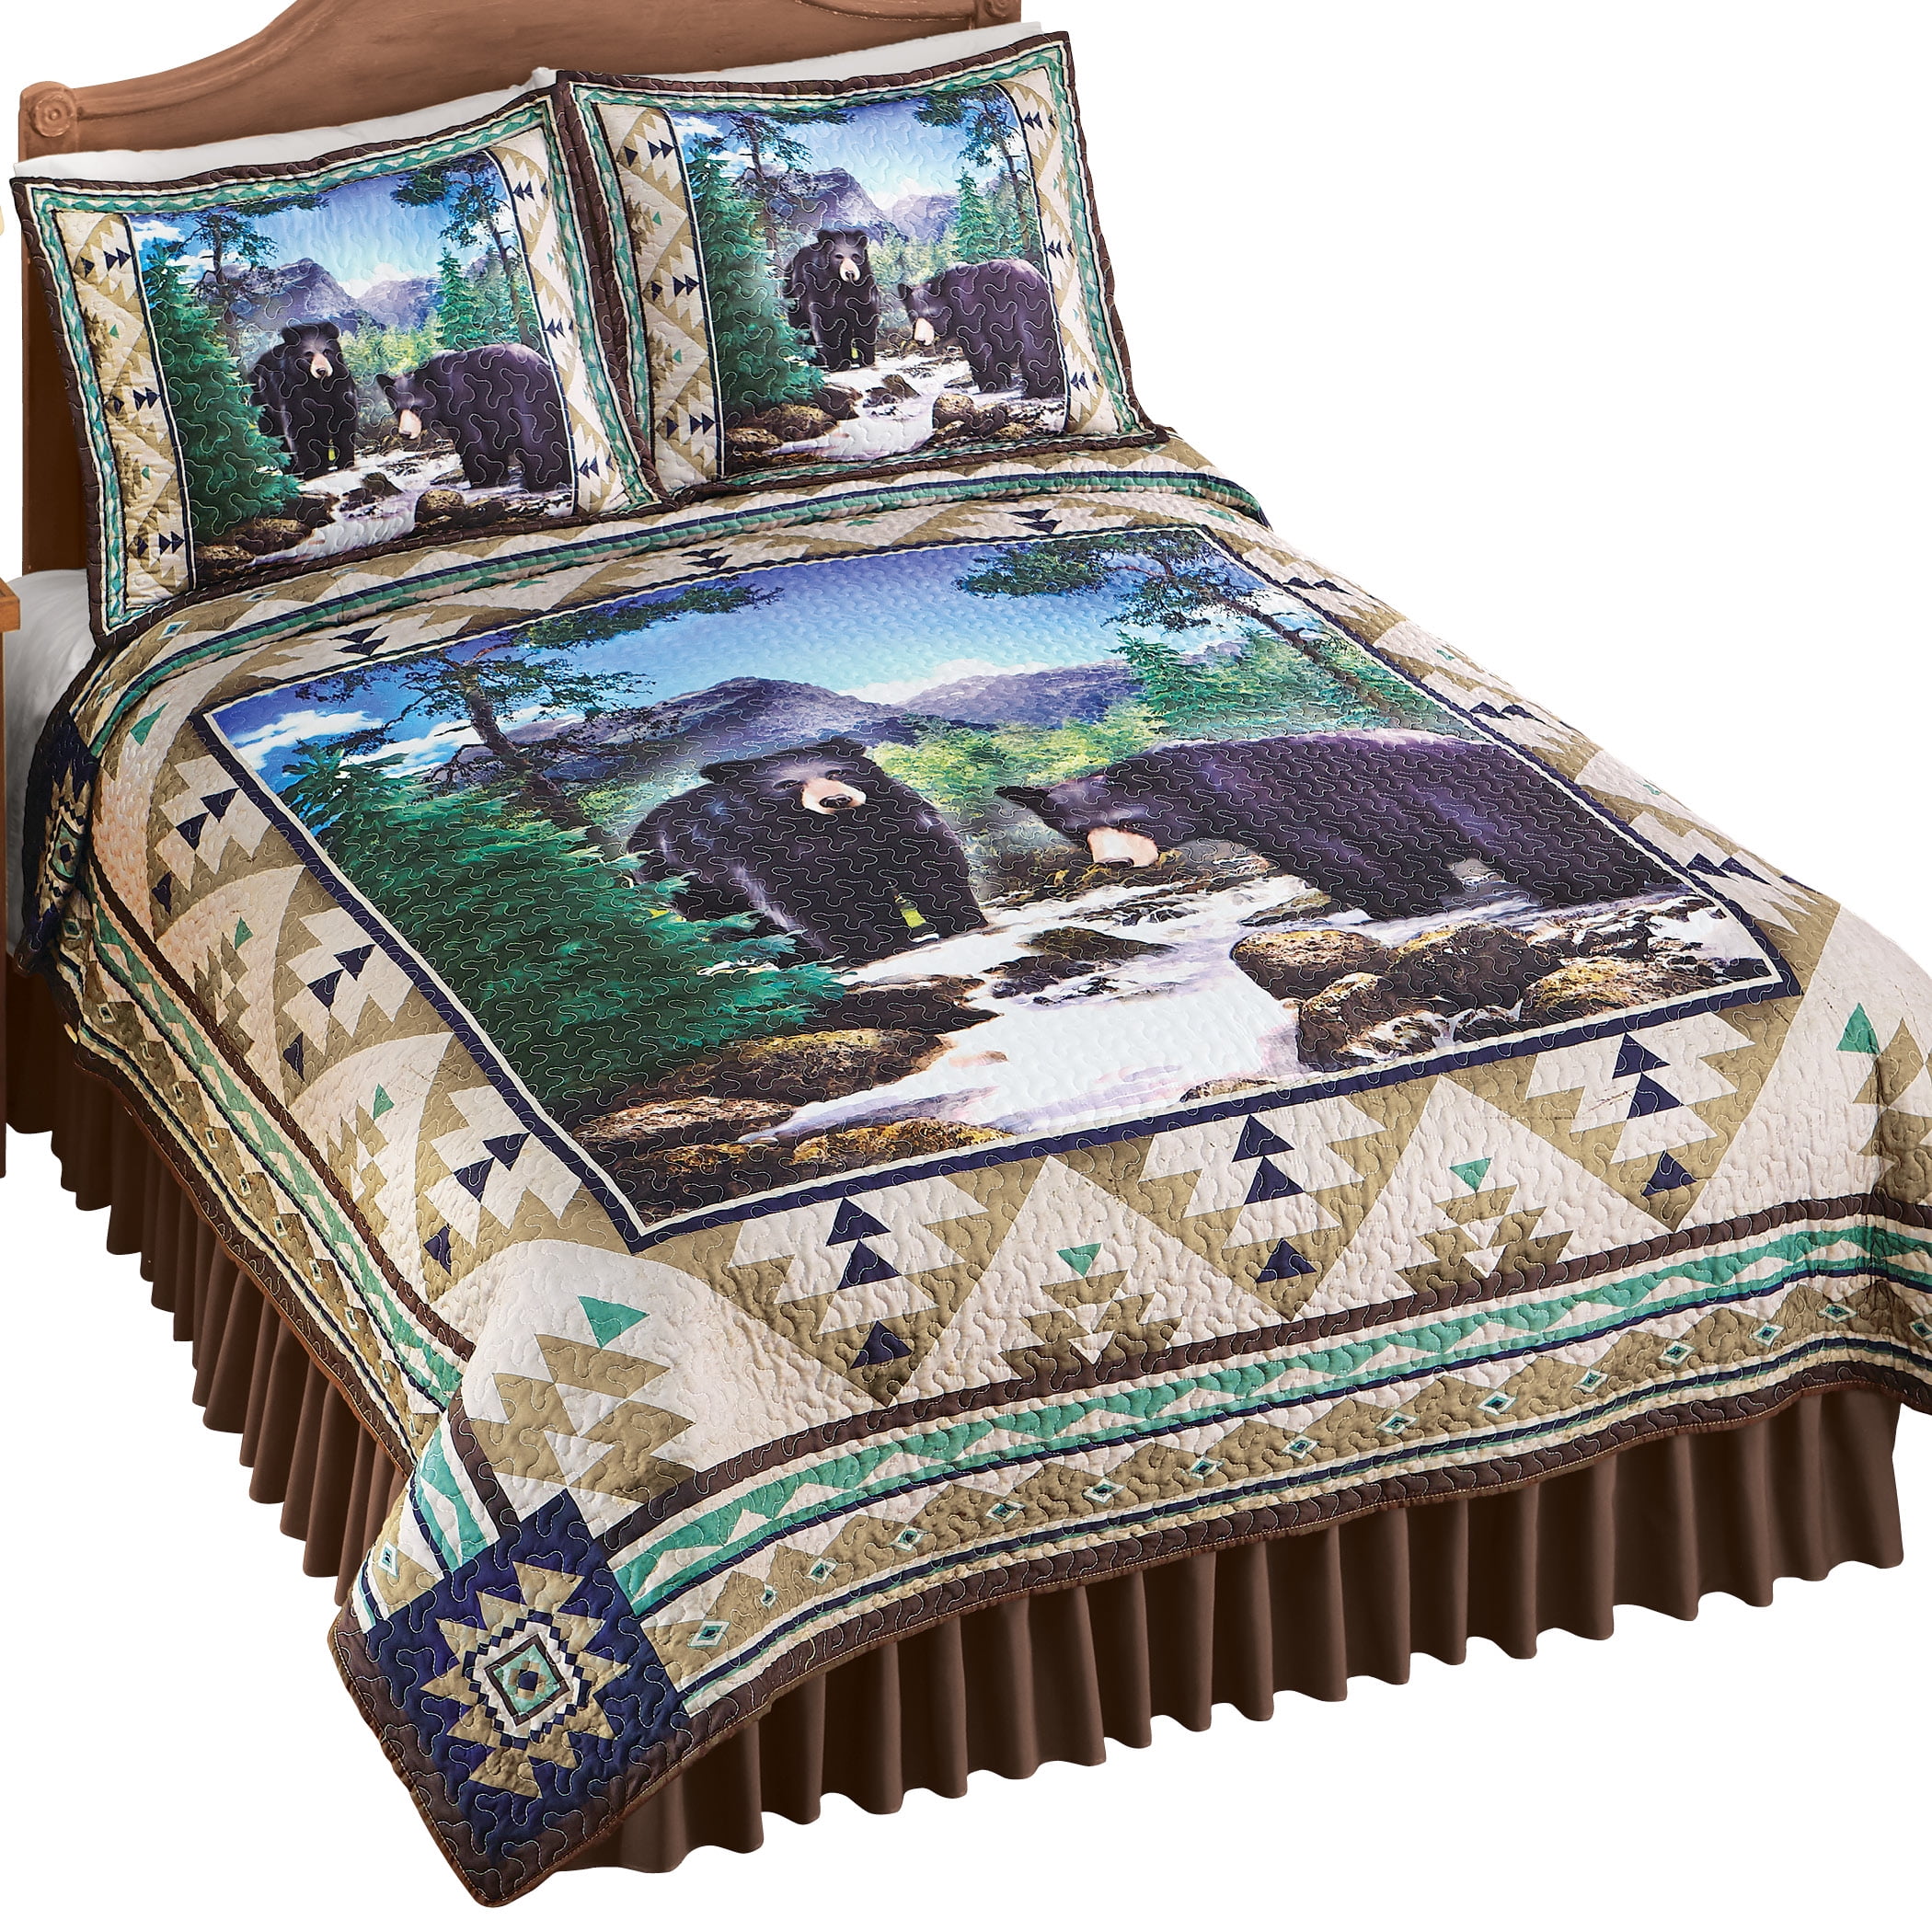 Bear in The Mountains Aztec Patterned Quilt Woodland Bedroom Decor